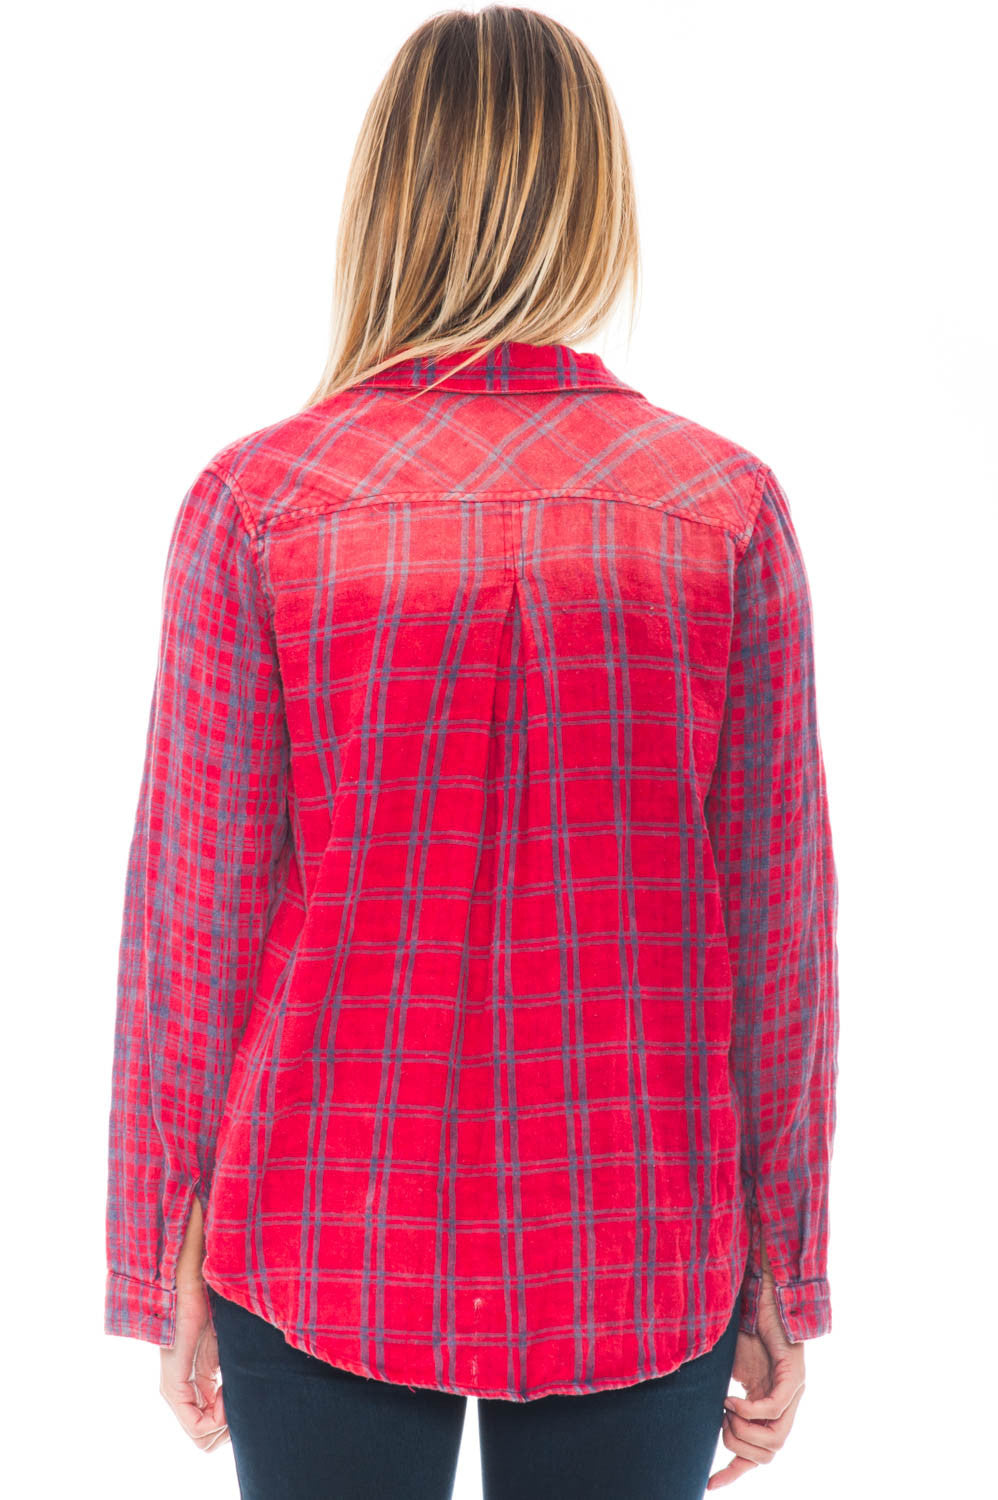 Shirt - Dye Collared Flannel By Paper Crane